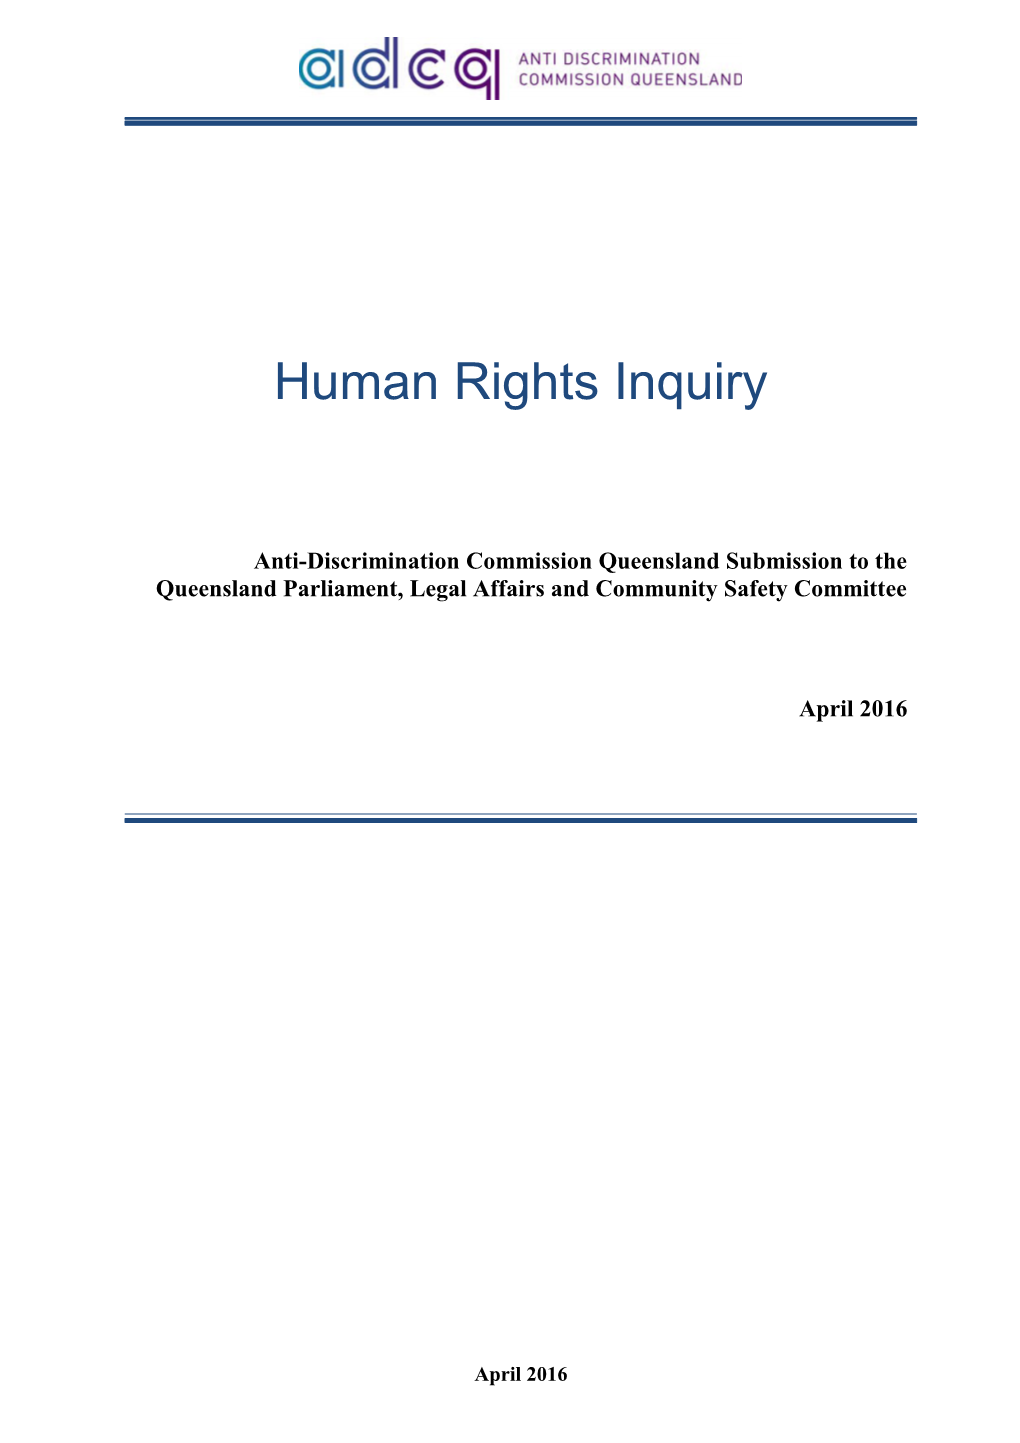 Human Rights Inquiry